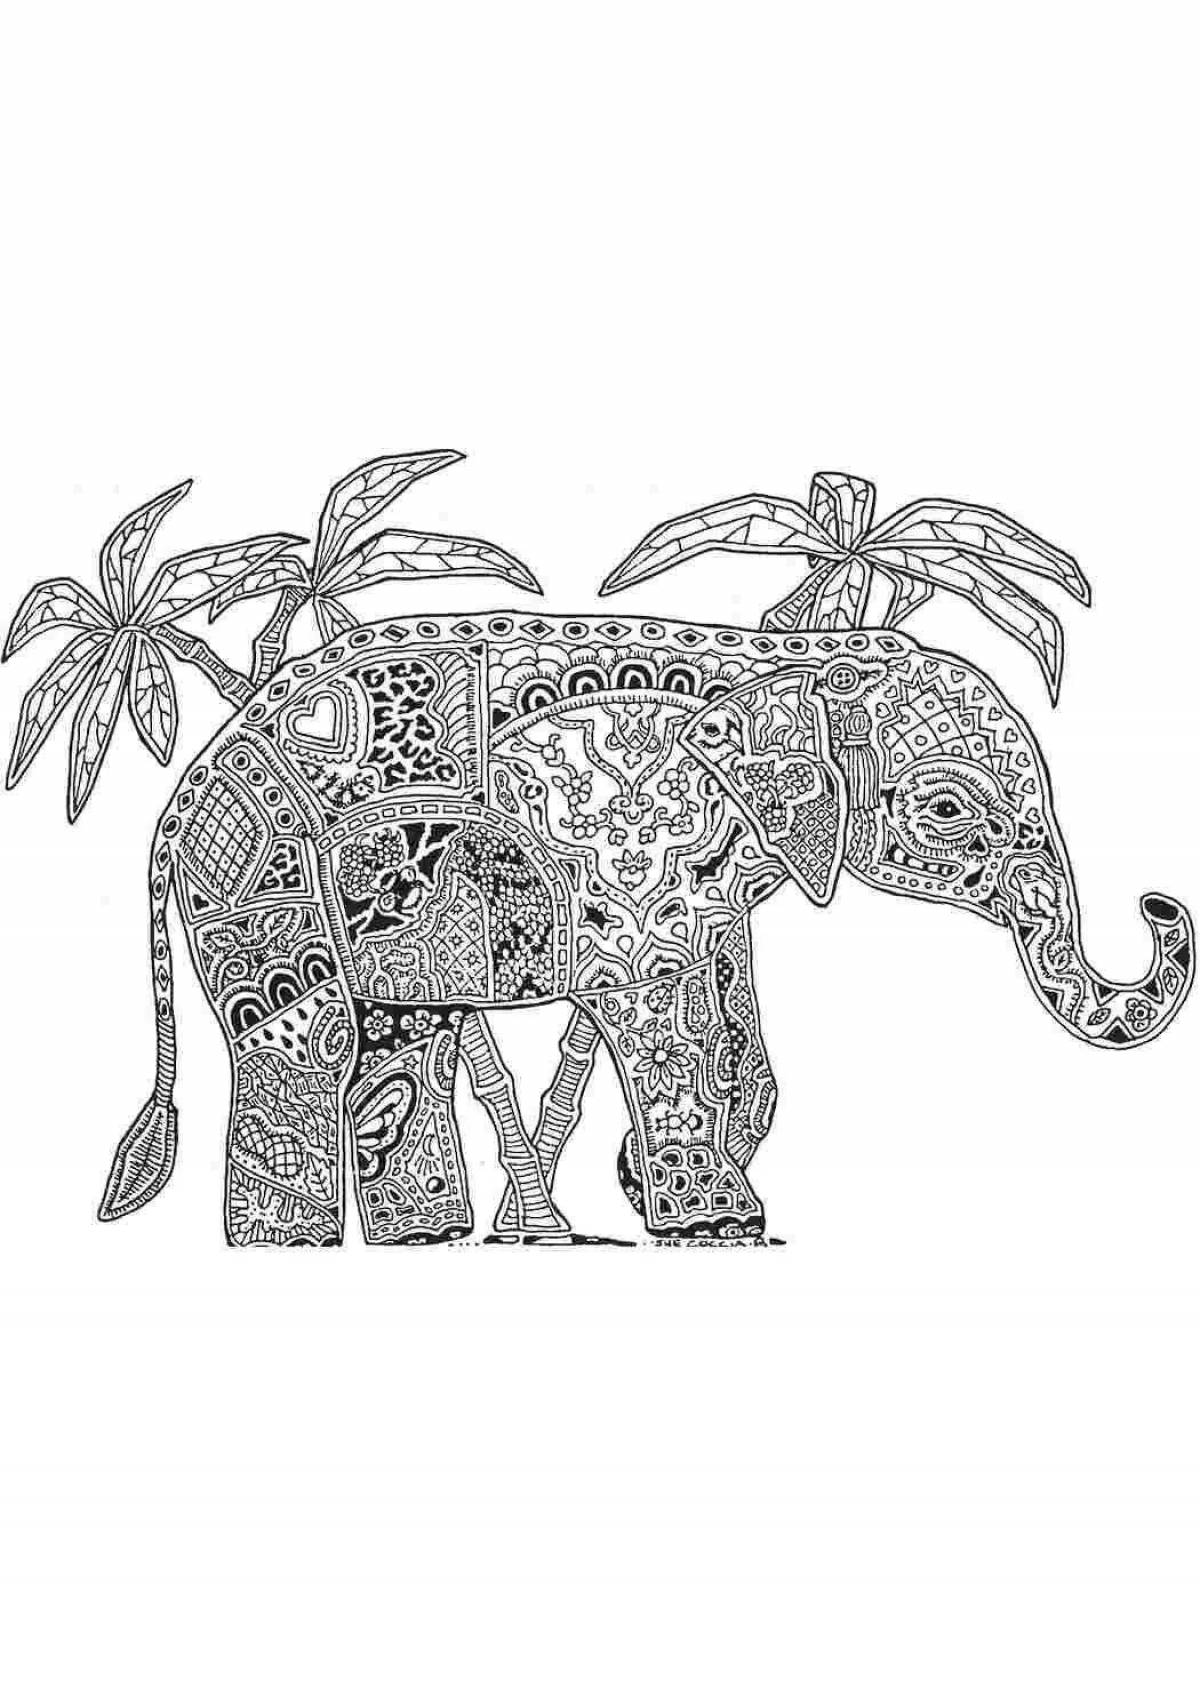 Funny anti-stress elephant coloring book